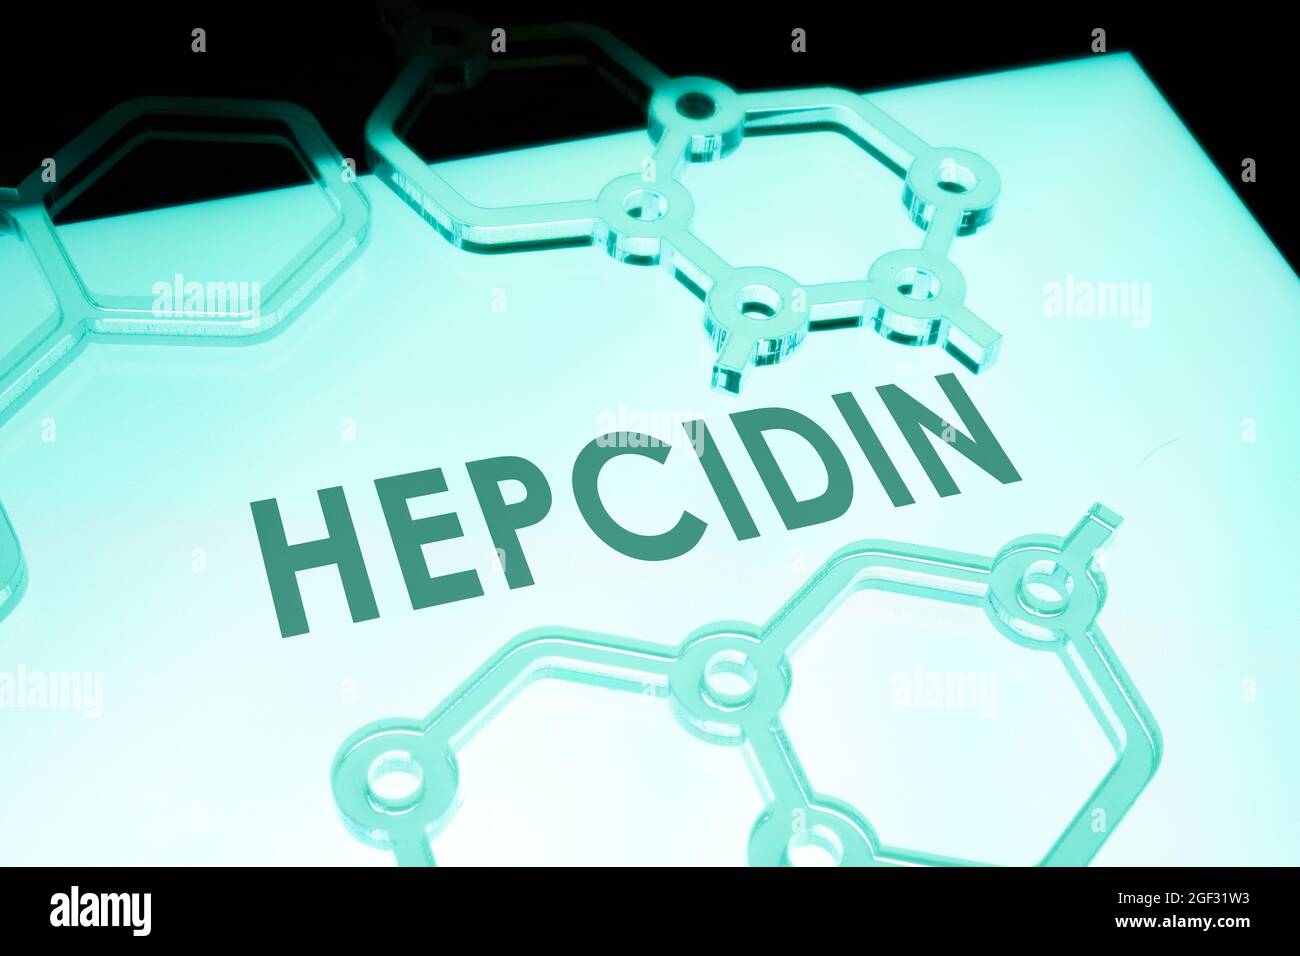 Hepcidin protein on the screen and plastic chemical models. Stock Photo